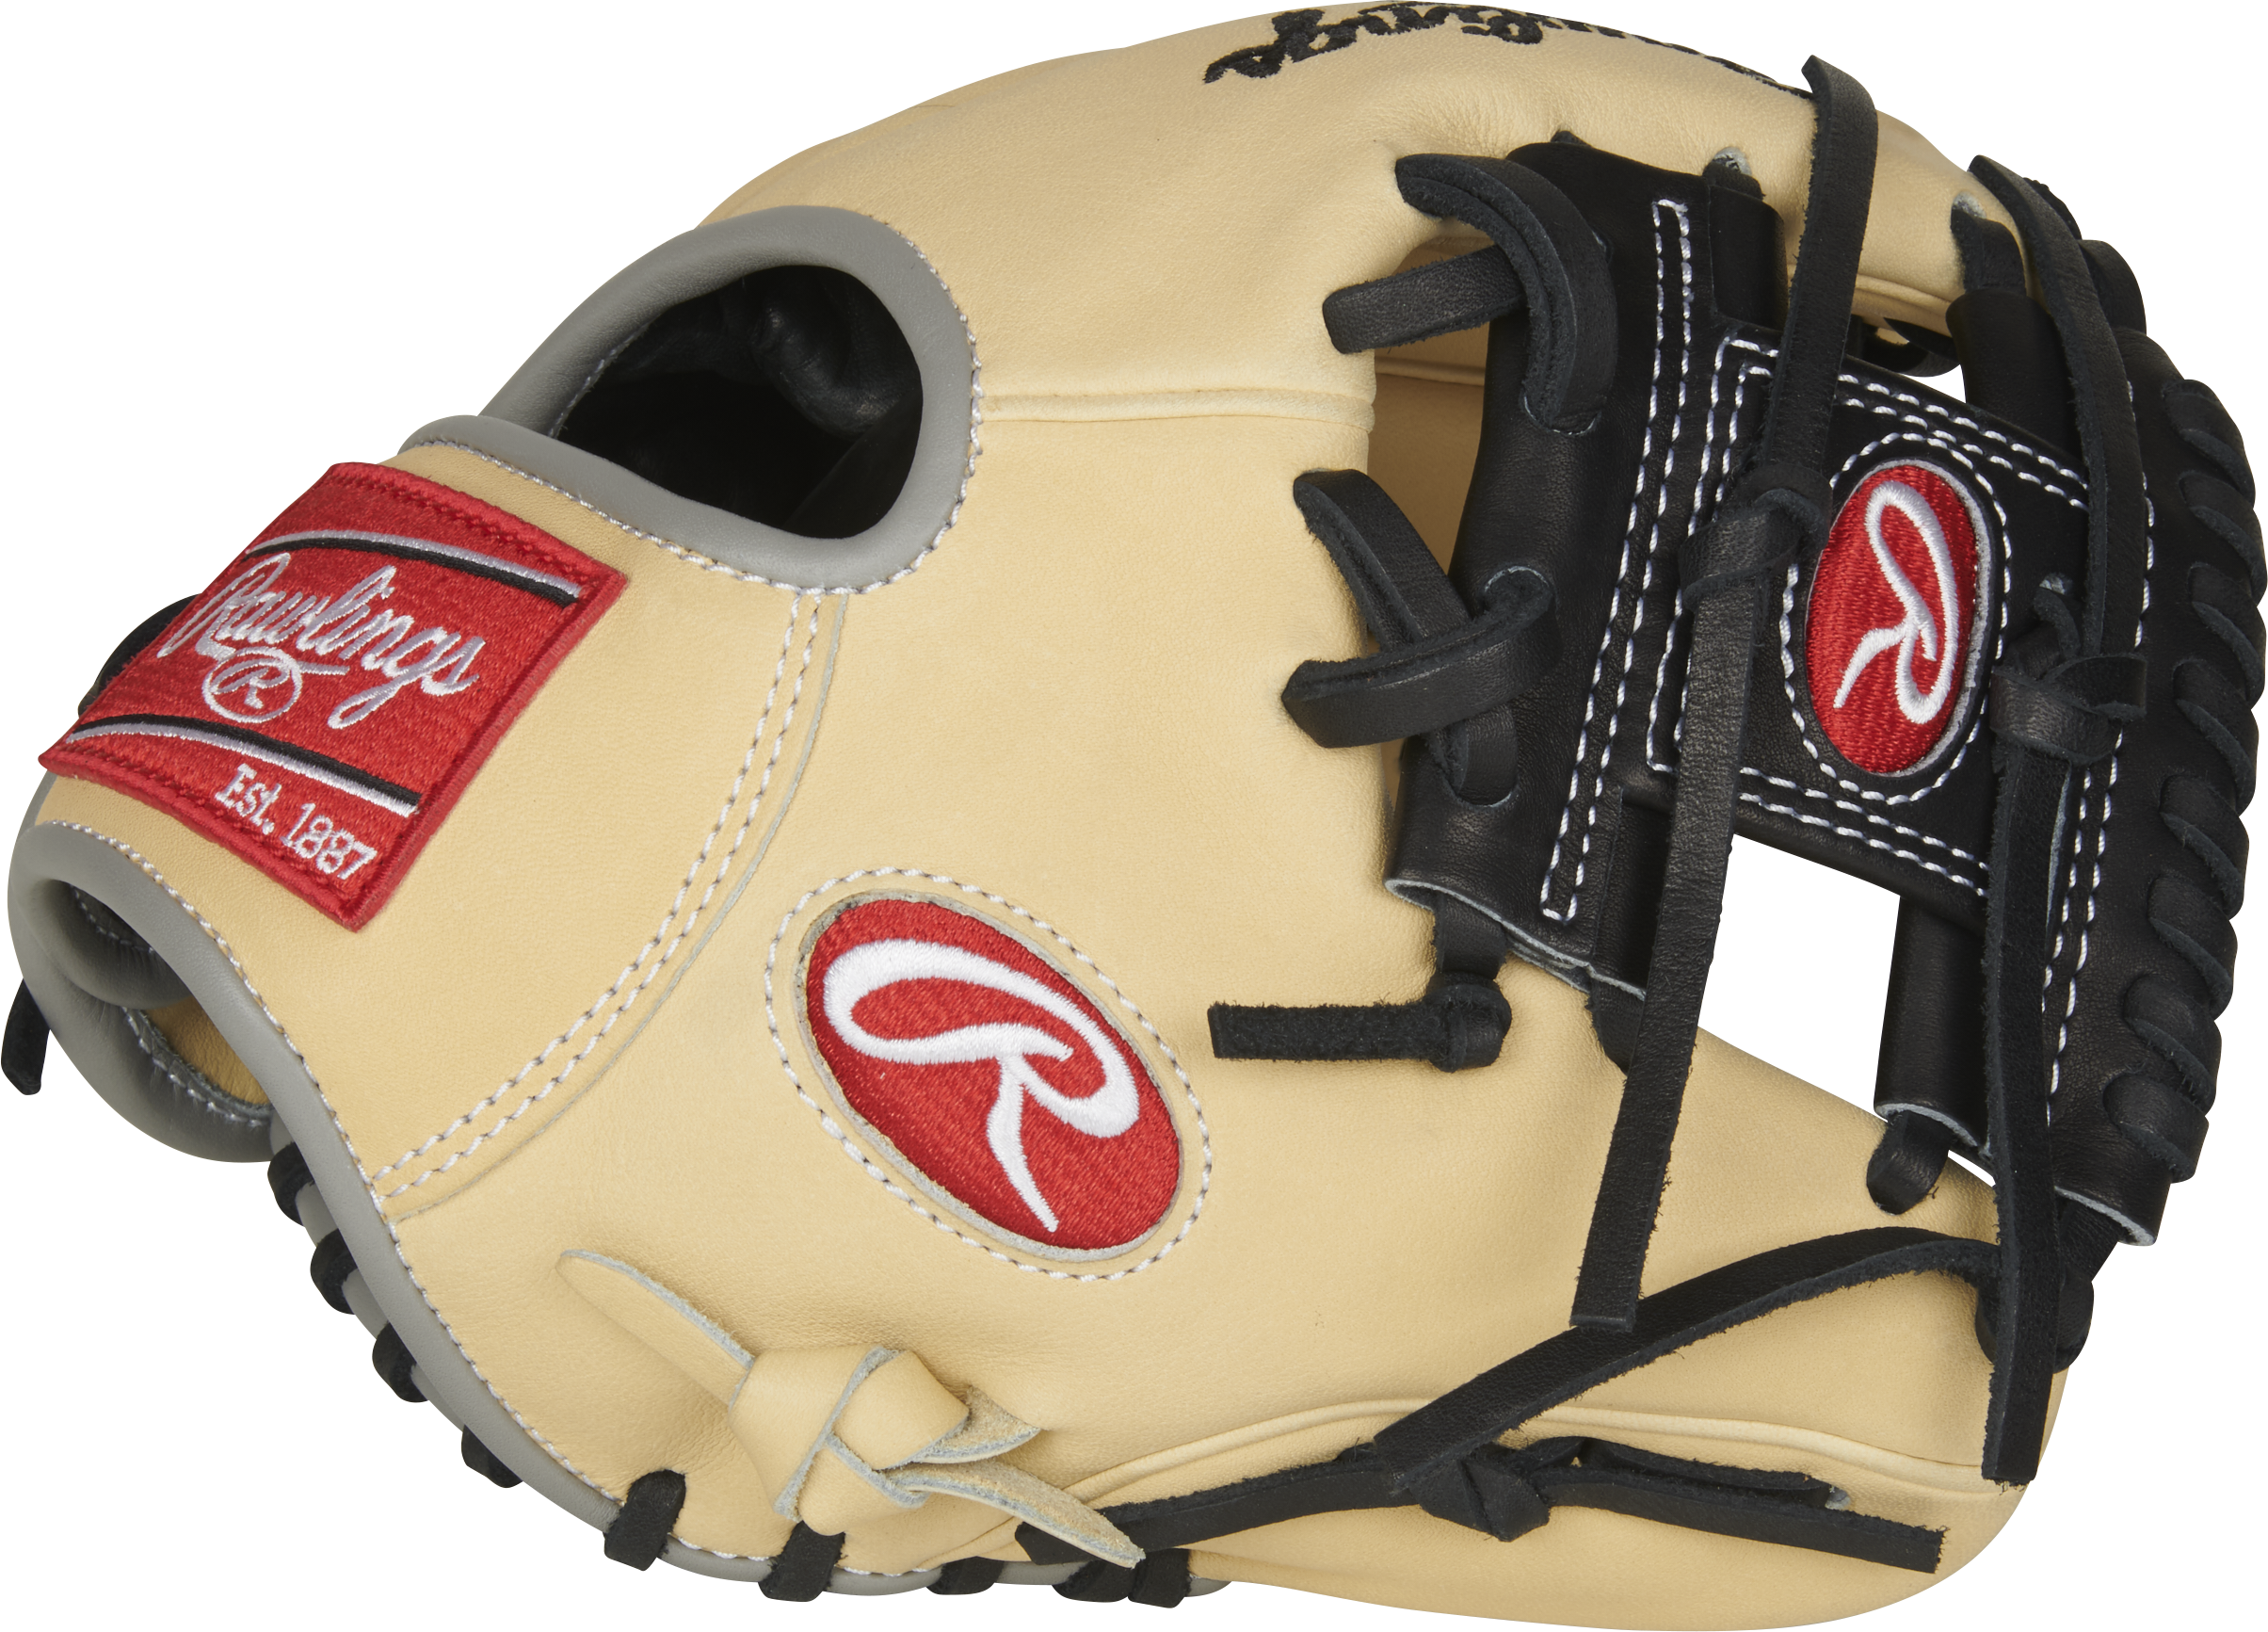 Rawlings Heart of the Hide Puerto Rico Infield Glove